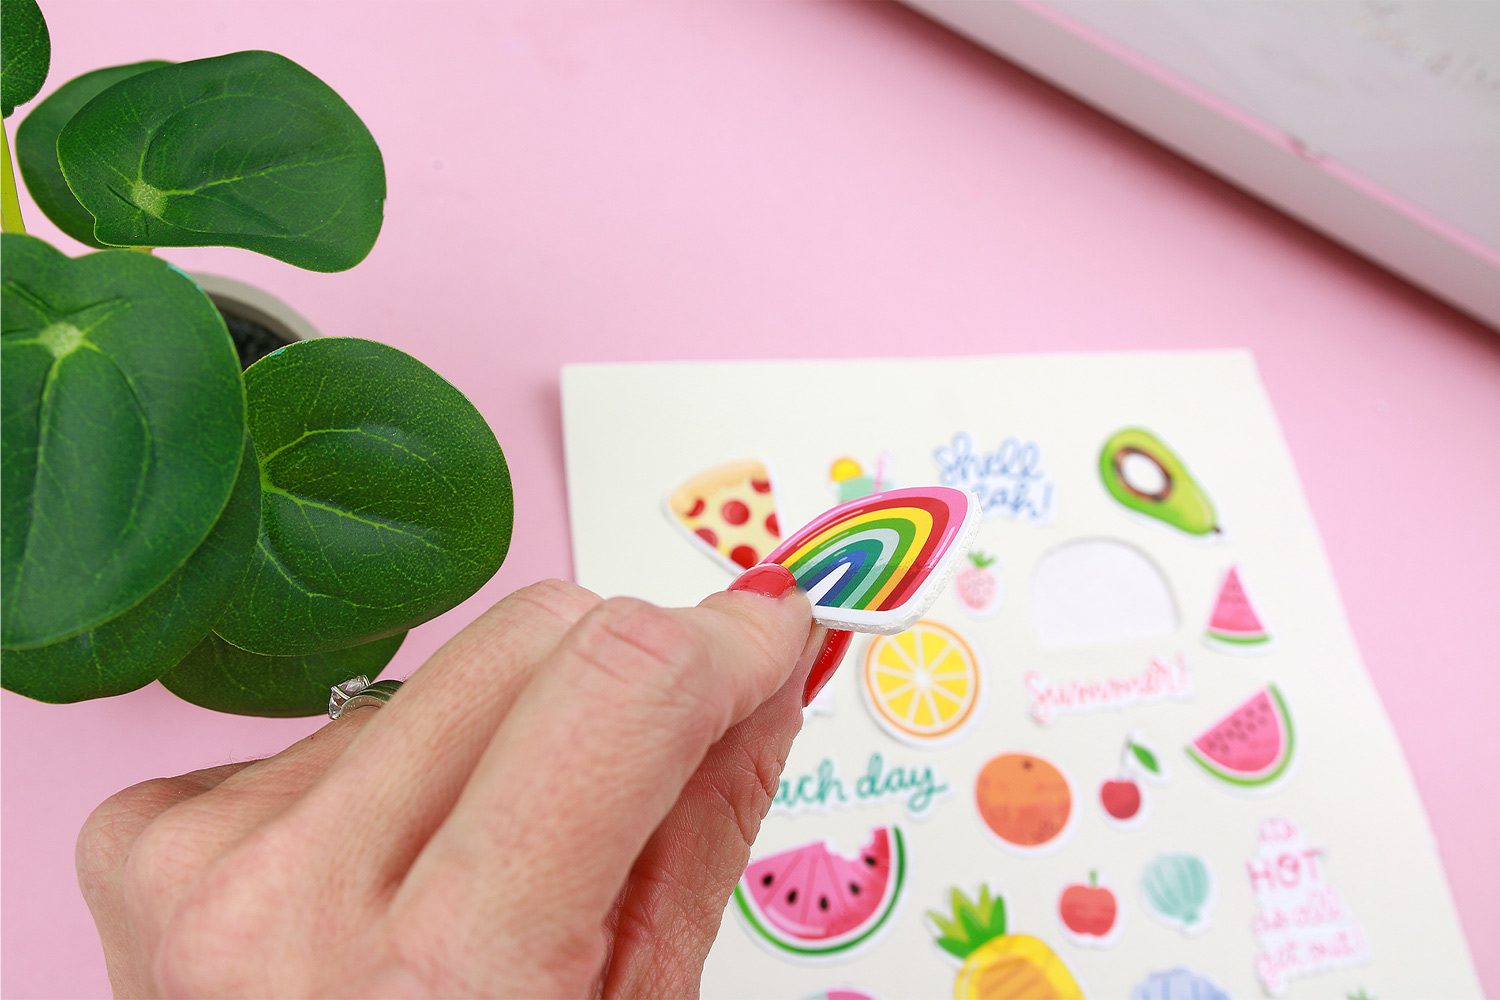 The Best Printable Sticker Paper for your DIY Stickers - Yay Day Paper